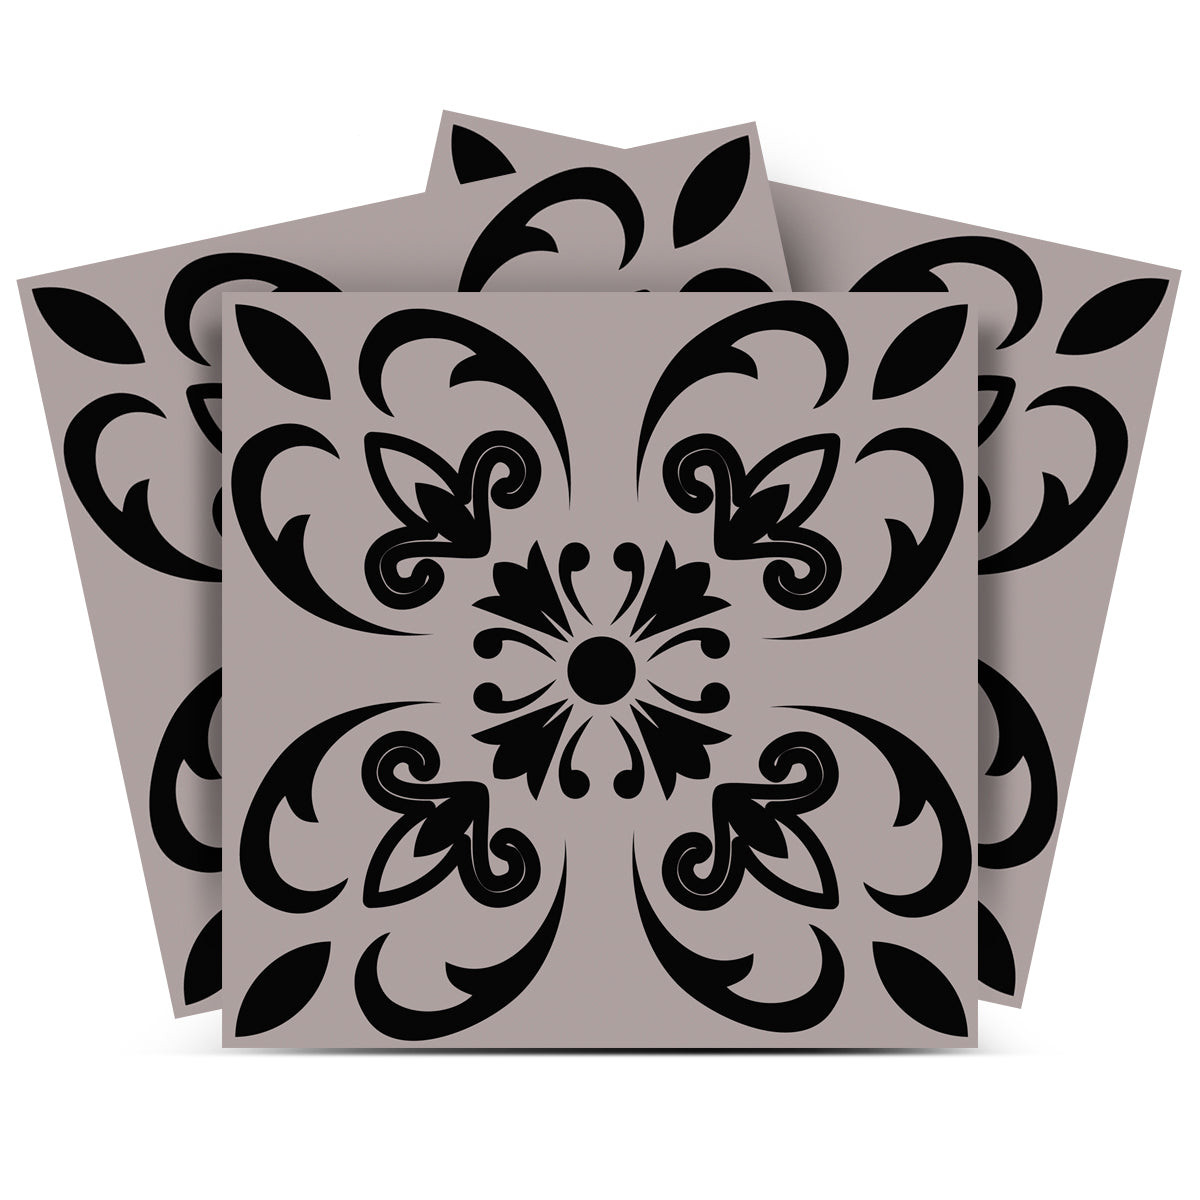 8" X 8" Black And White Orchid Peel And Stick Removable Tiles-390782-1